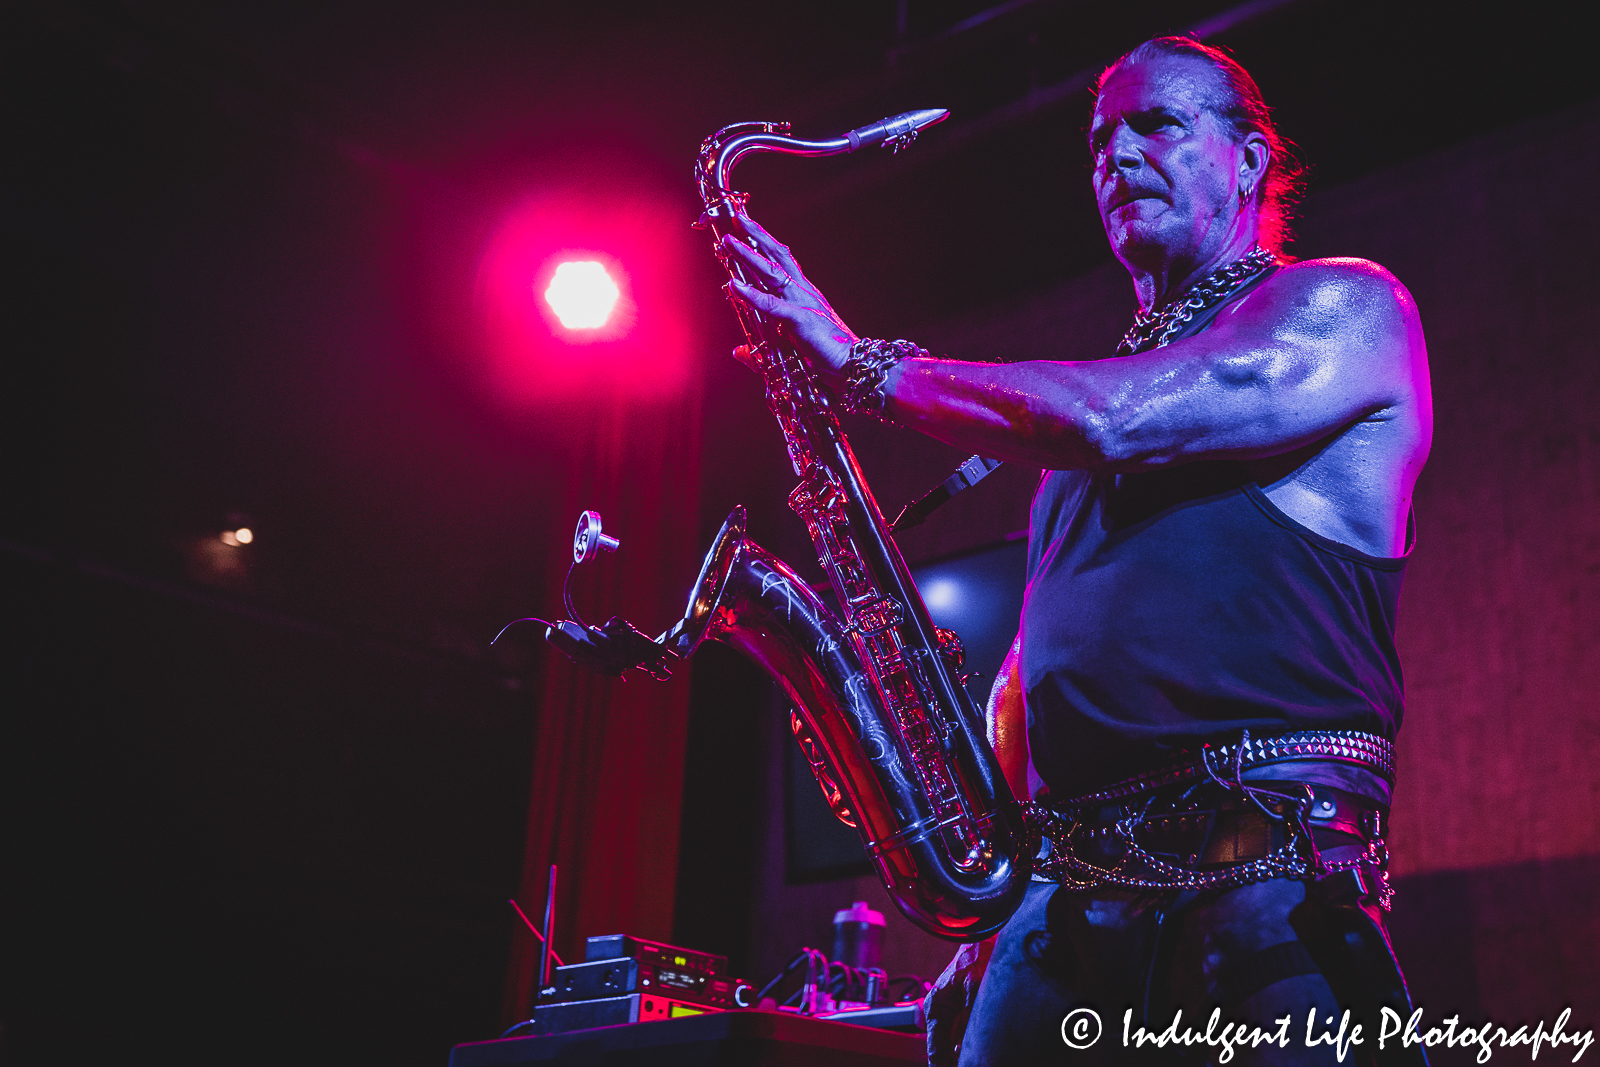 Saxophone player Tim Cappello opening his show at the recordBar in downtown Kansas City, MO on June 15, 2023.